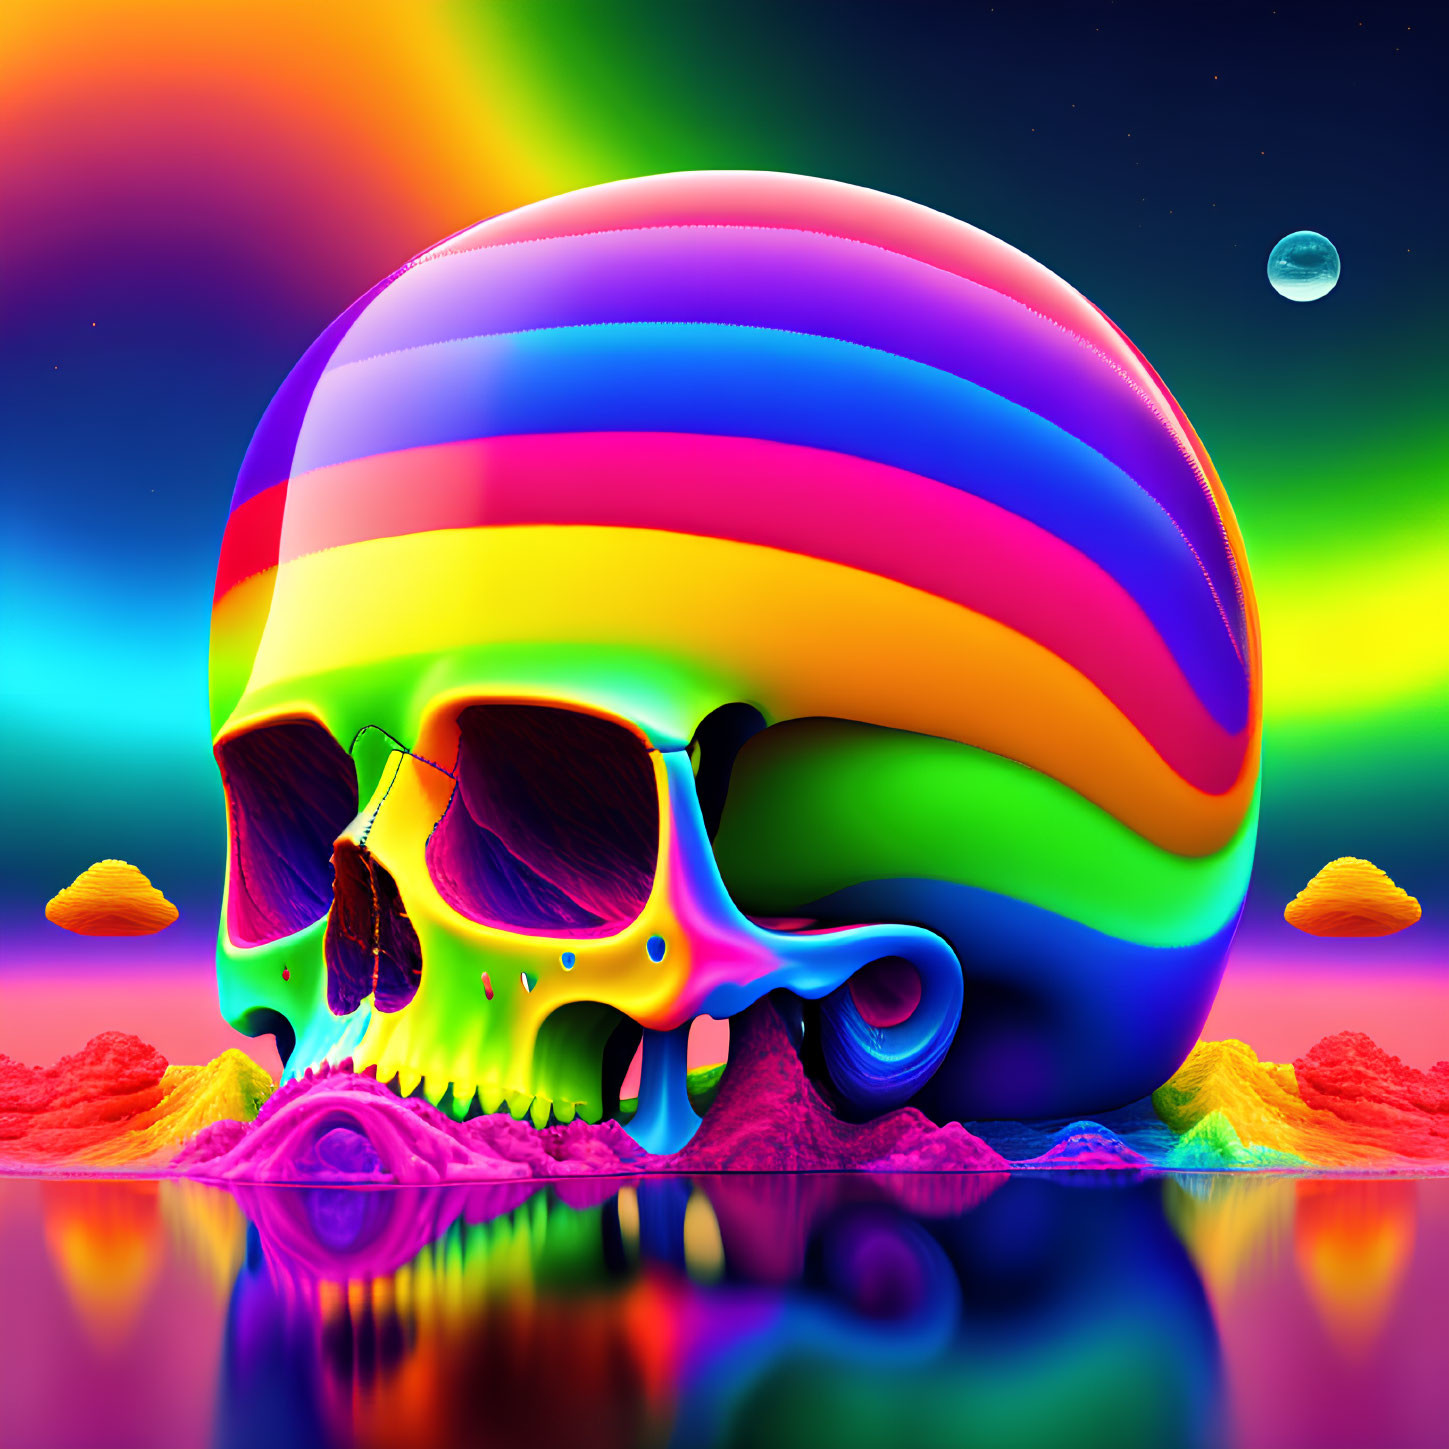 Colorful Skull Against Psychedelic Backdrop with Neon Sky